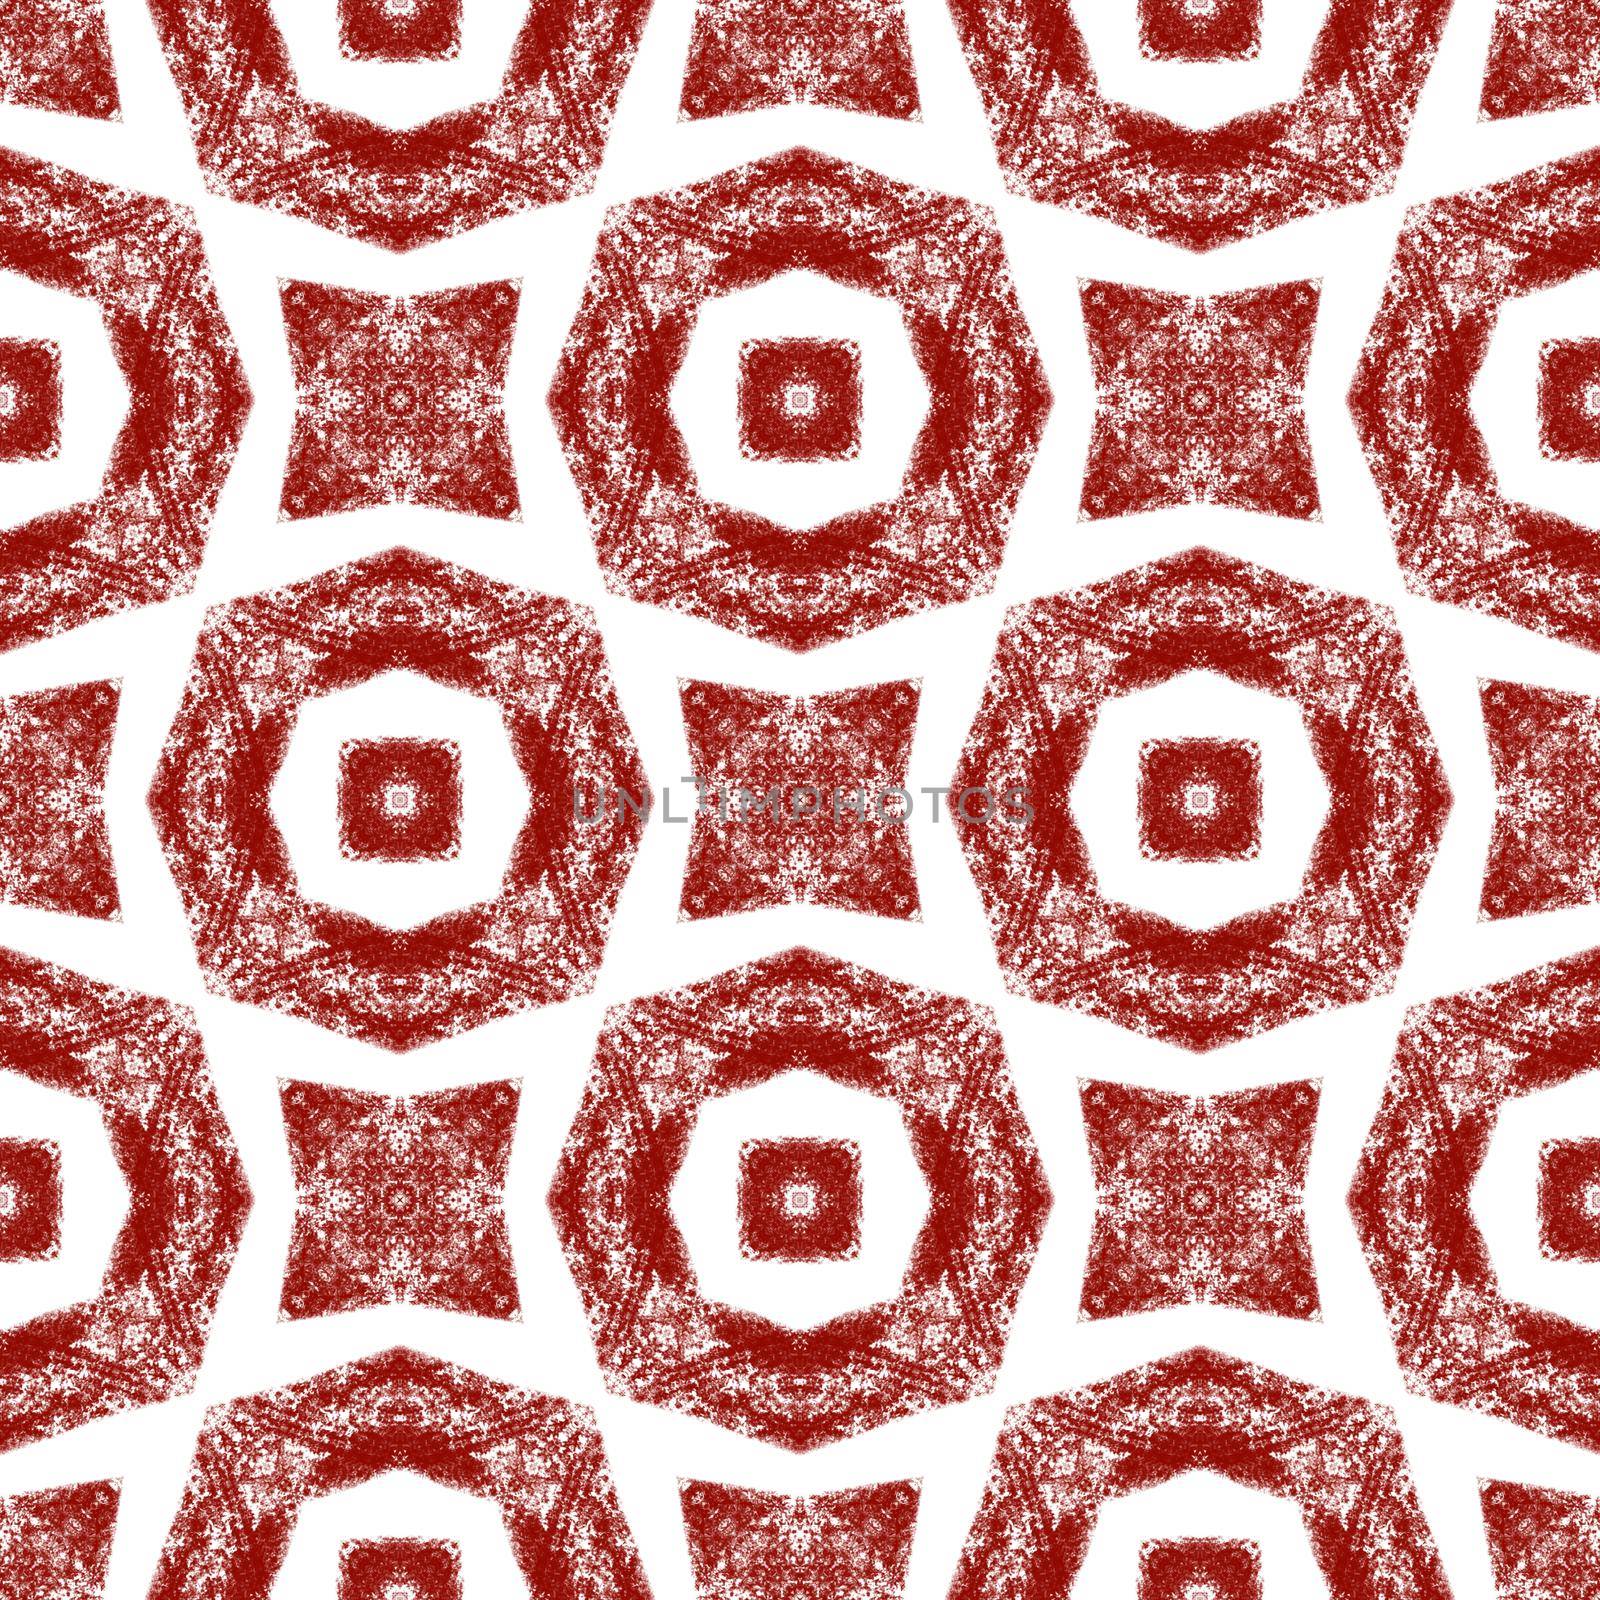 Striped hand drawn pattern. Wine red symmetrical kaleidoscope background. Repeating striped hand drawn tile. Textile ready noteworthy print, swimwear fabric, wallpaper, wrapping.